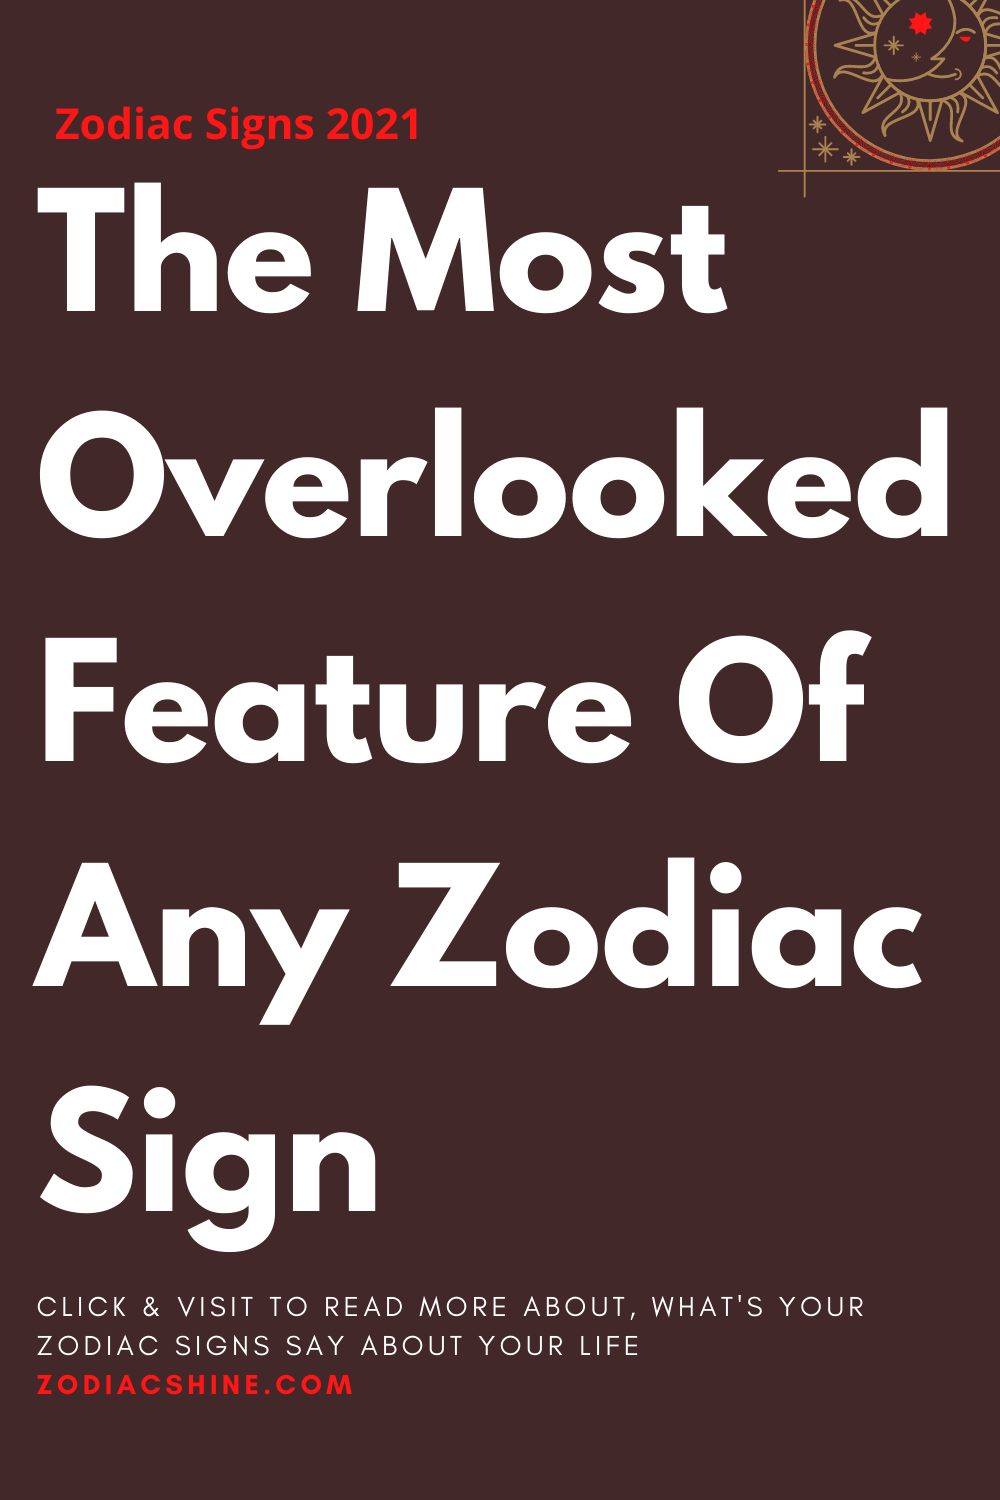 The Most Overlooked Feature Of Any Zodiac Sign